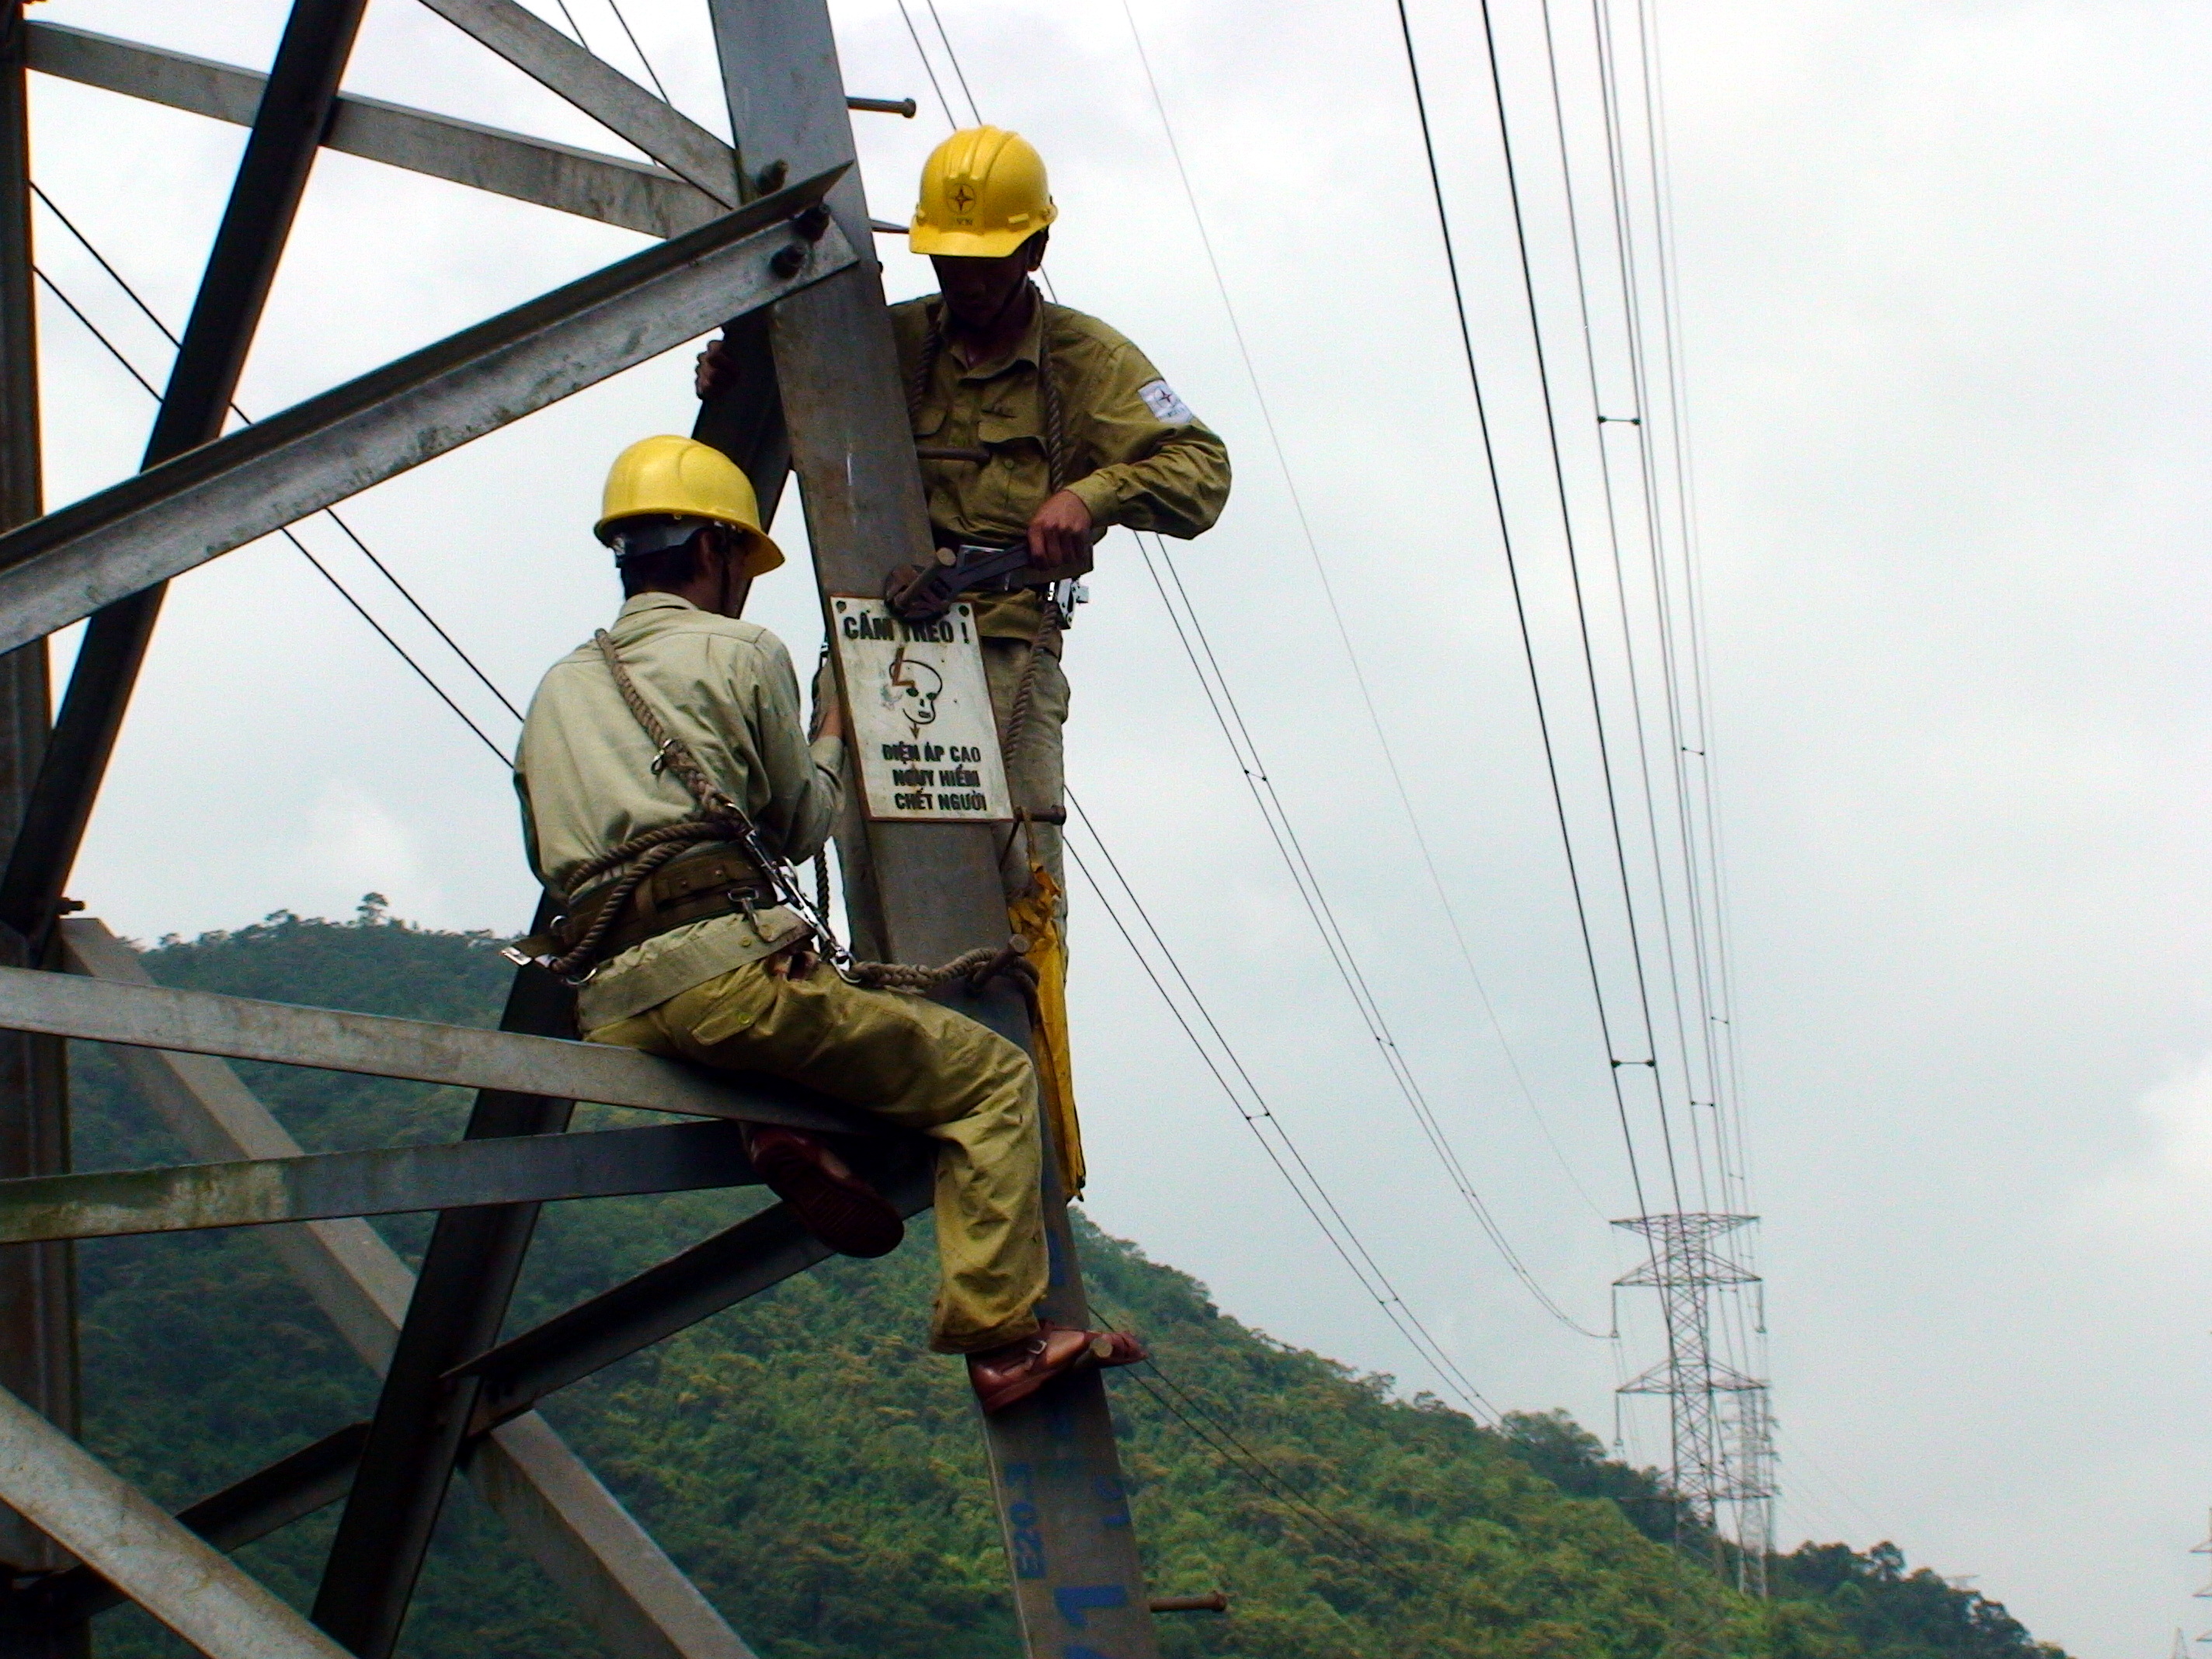 Meet the workers who take care of high voltage electricity poles in Vietnam